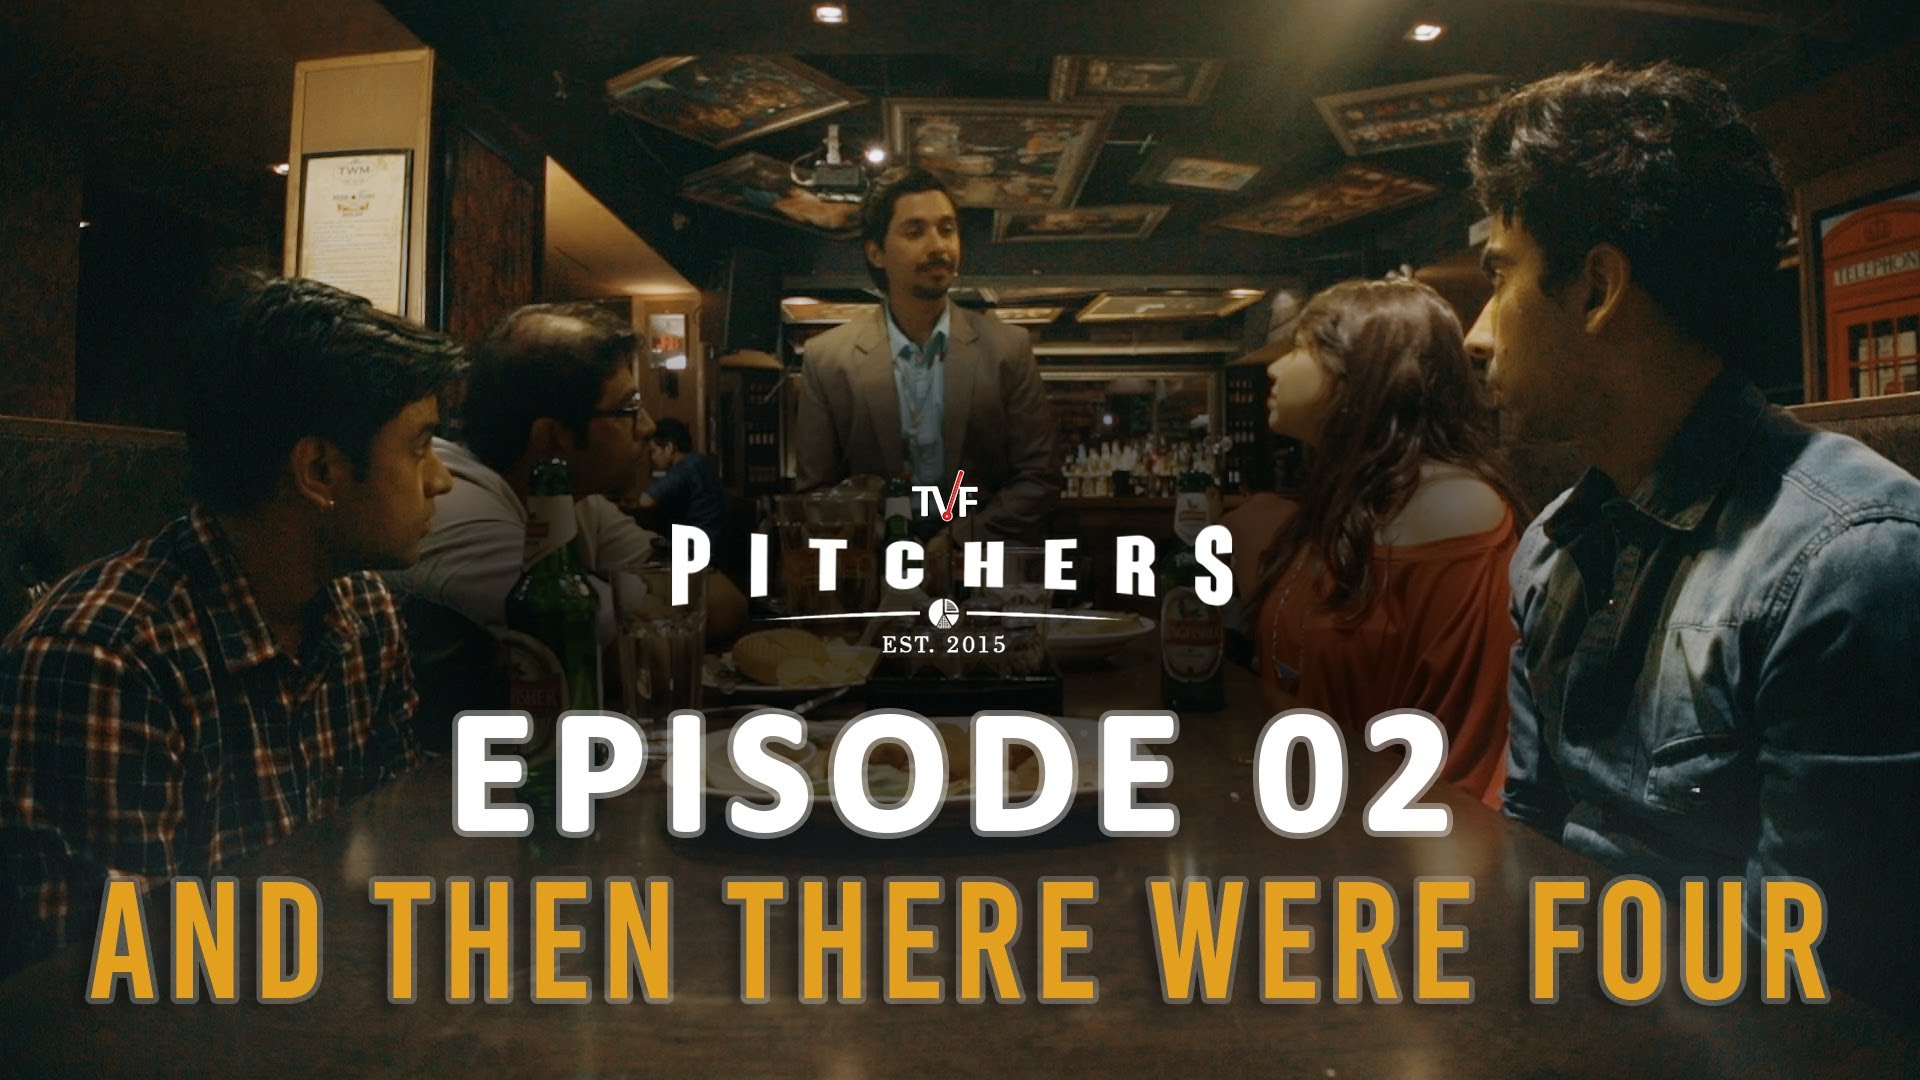 And Then There Were Four Tvf Pitchers S01e02 Now On Steemit Steemit 31.10.2020 · has tvf pitchers season 2 release rate revealed? steemit